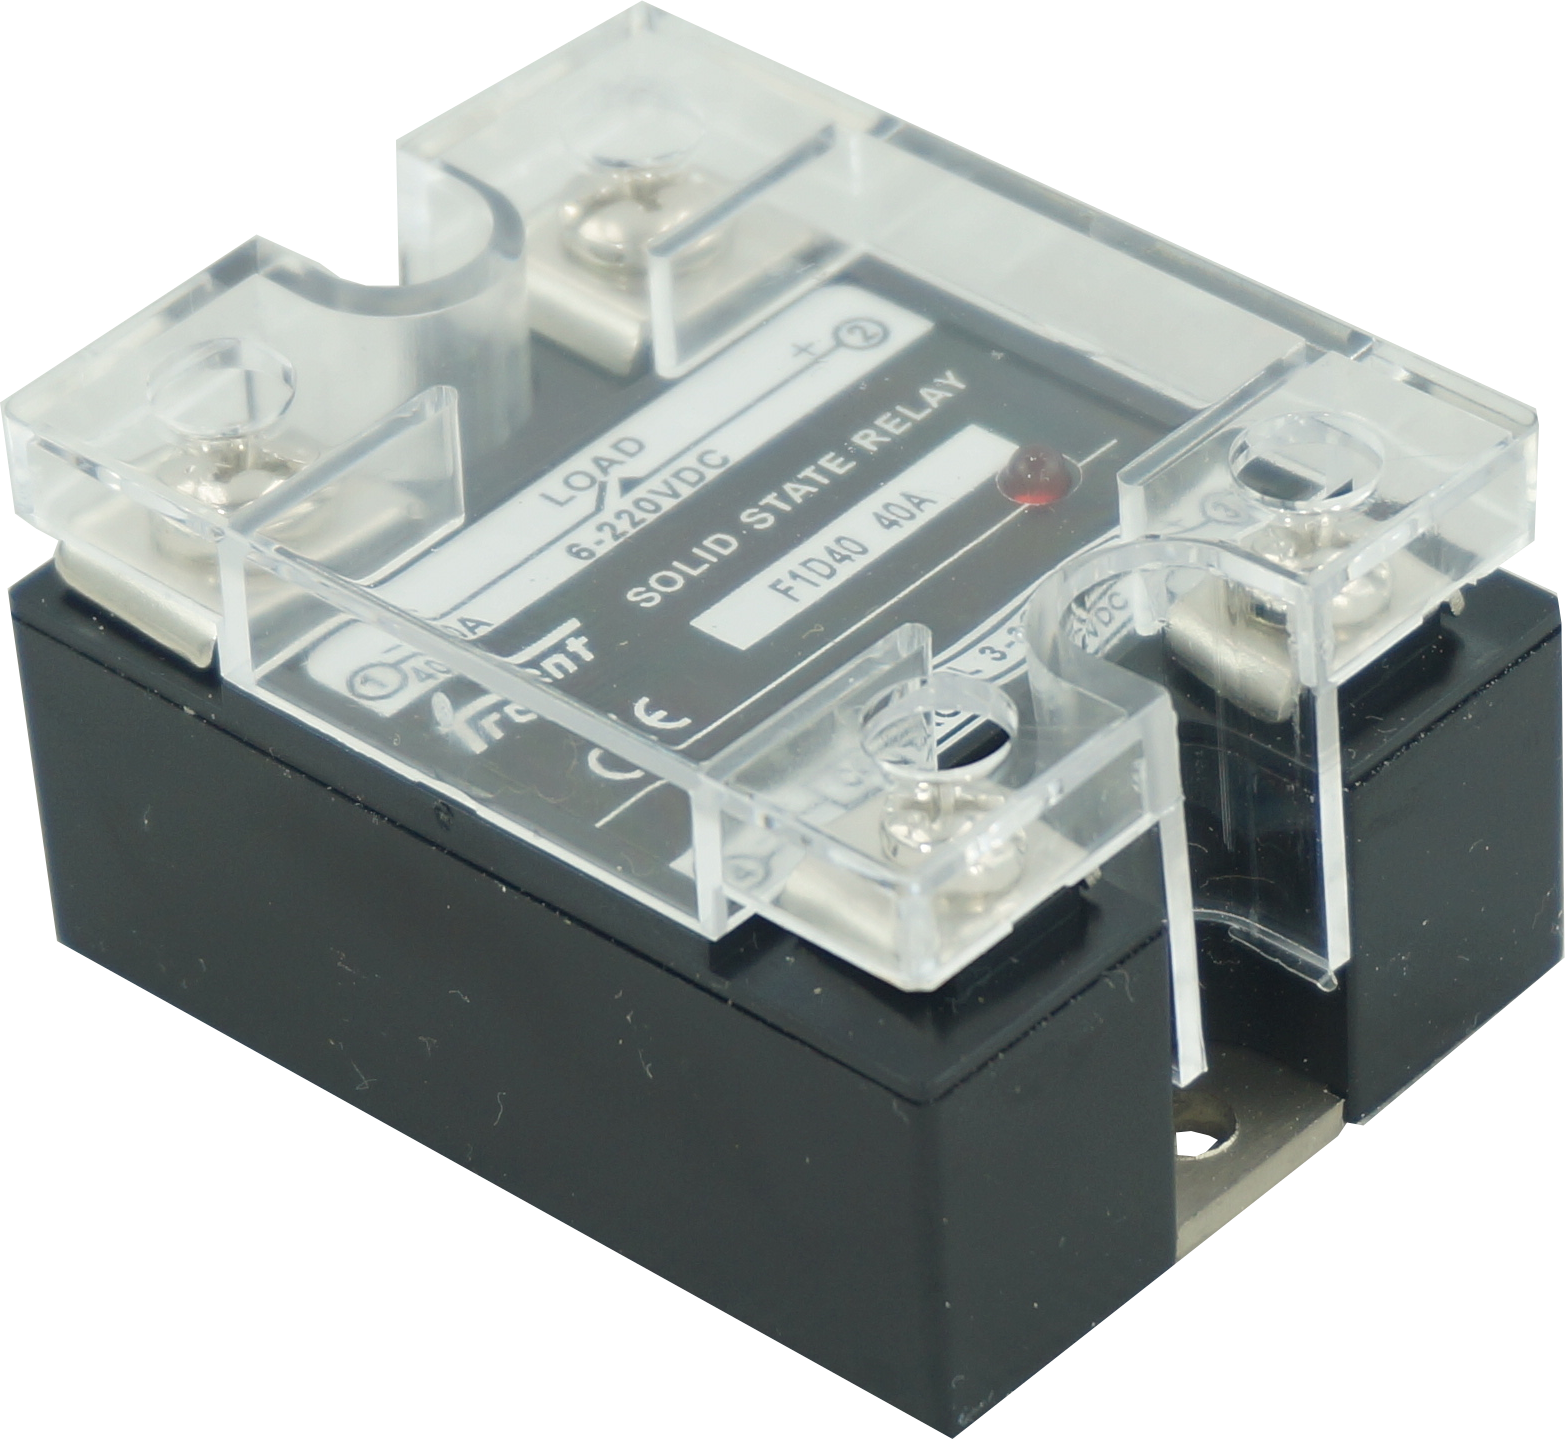 F1D100-12, Solid State Relay, DC 3.5-32VDC control, 100A, 12-220VDC Load